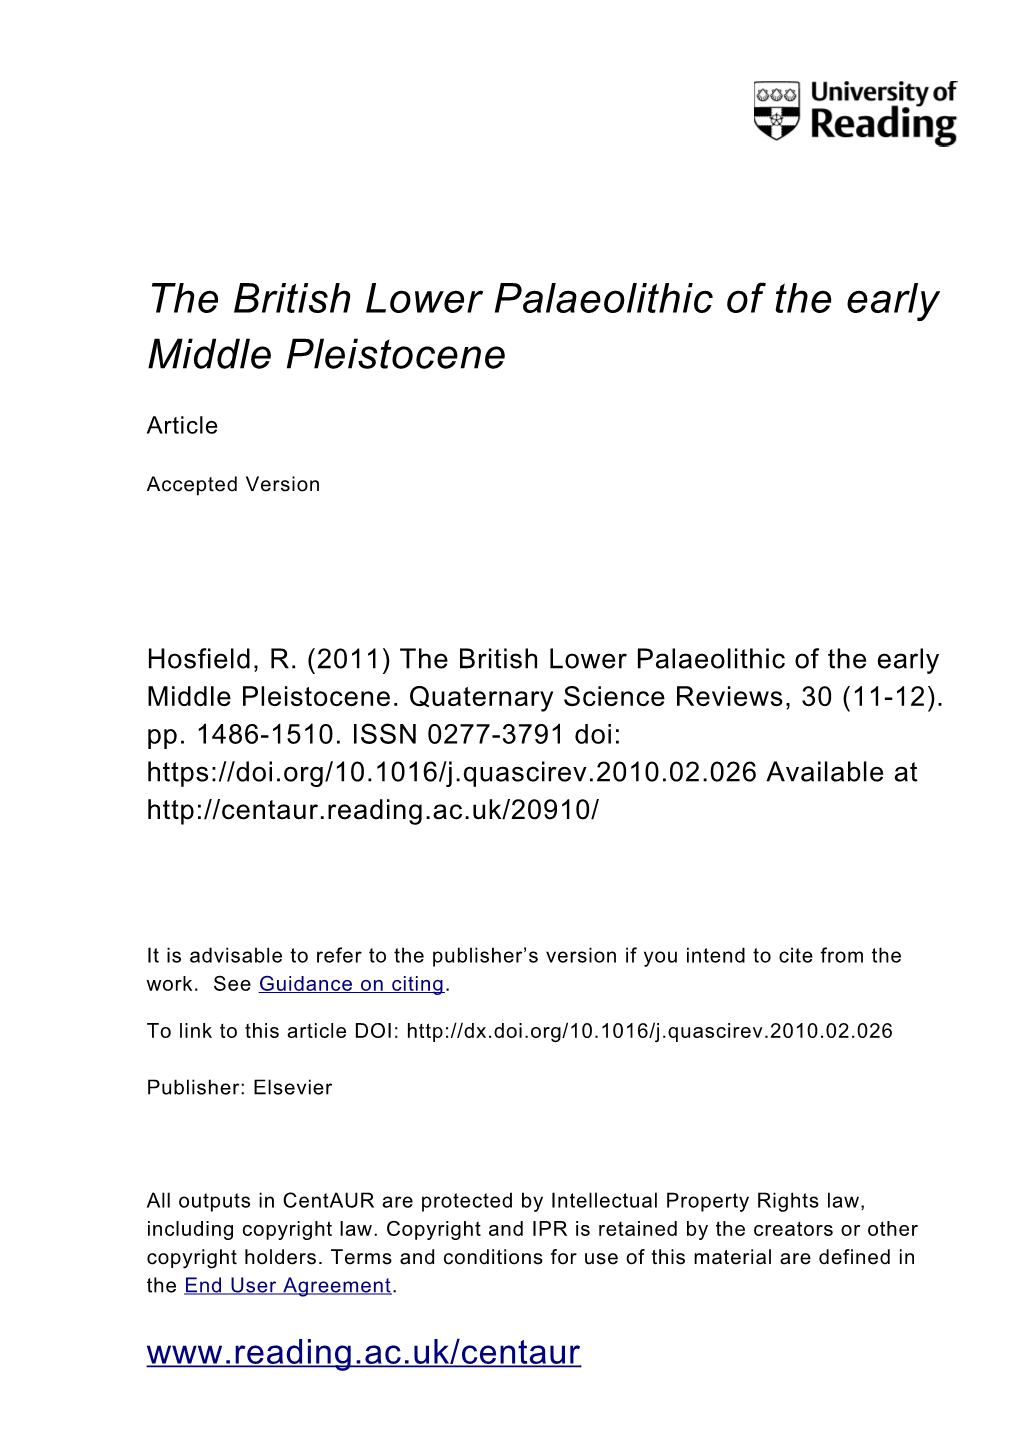 The British Lower Palaeolithic of the Early Middle Pleistocene